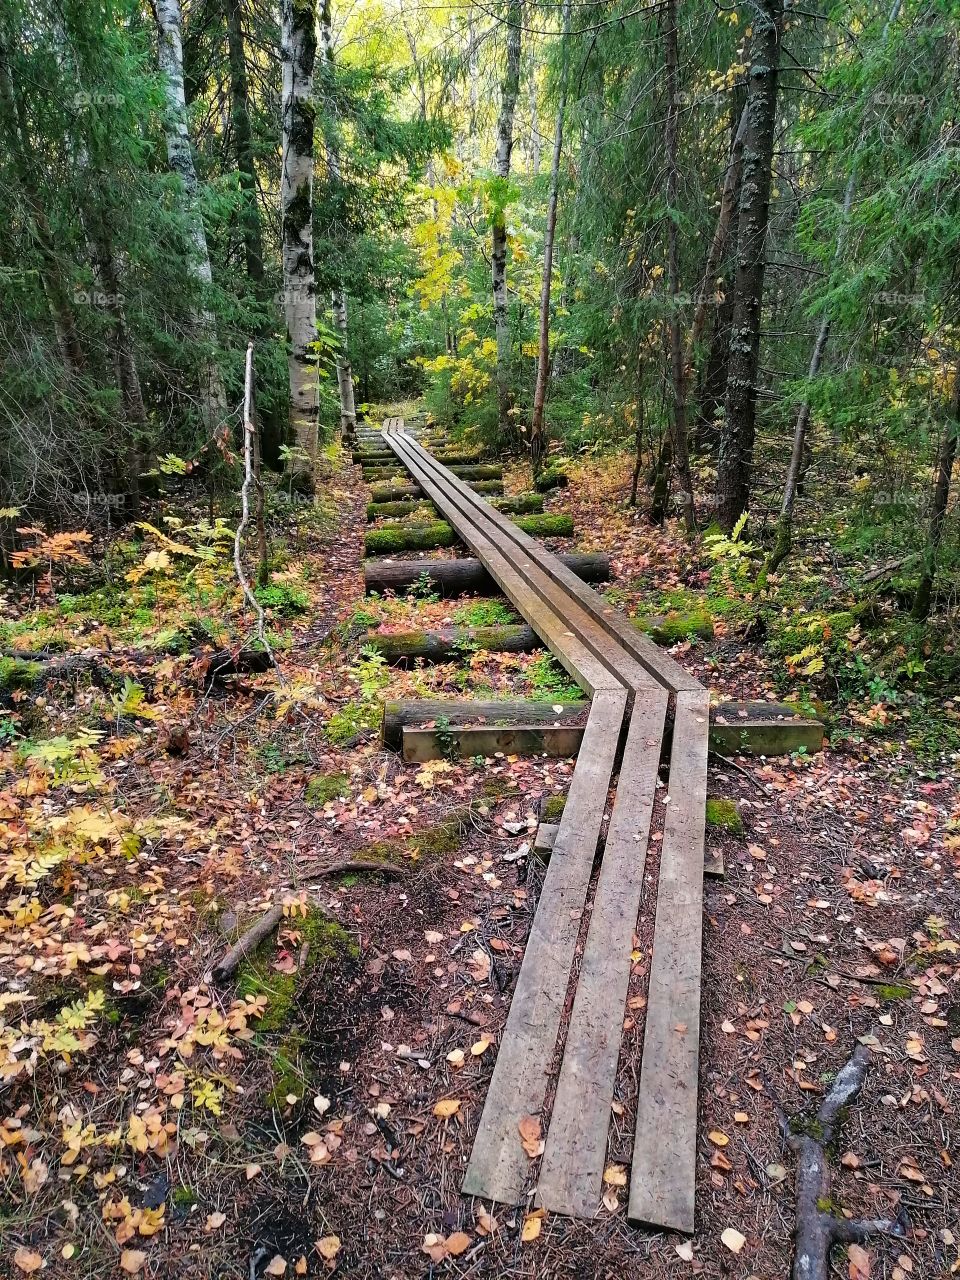 On a day trip in the Finnish forest in September.